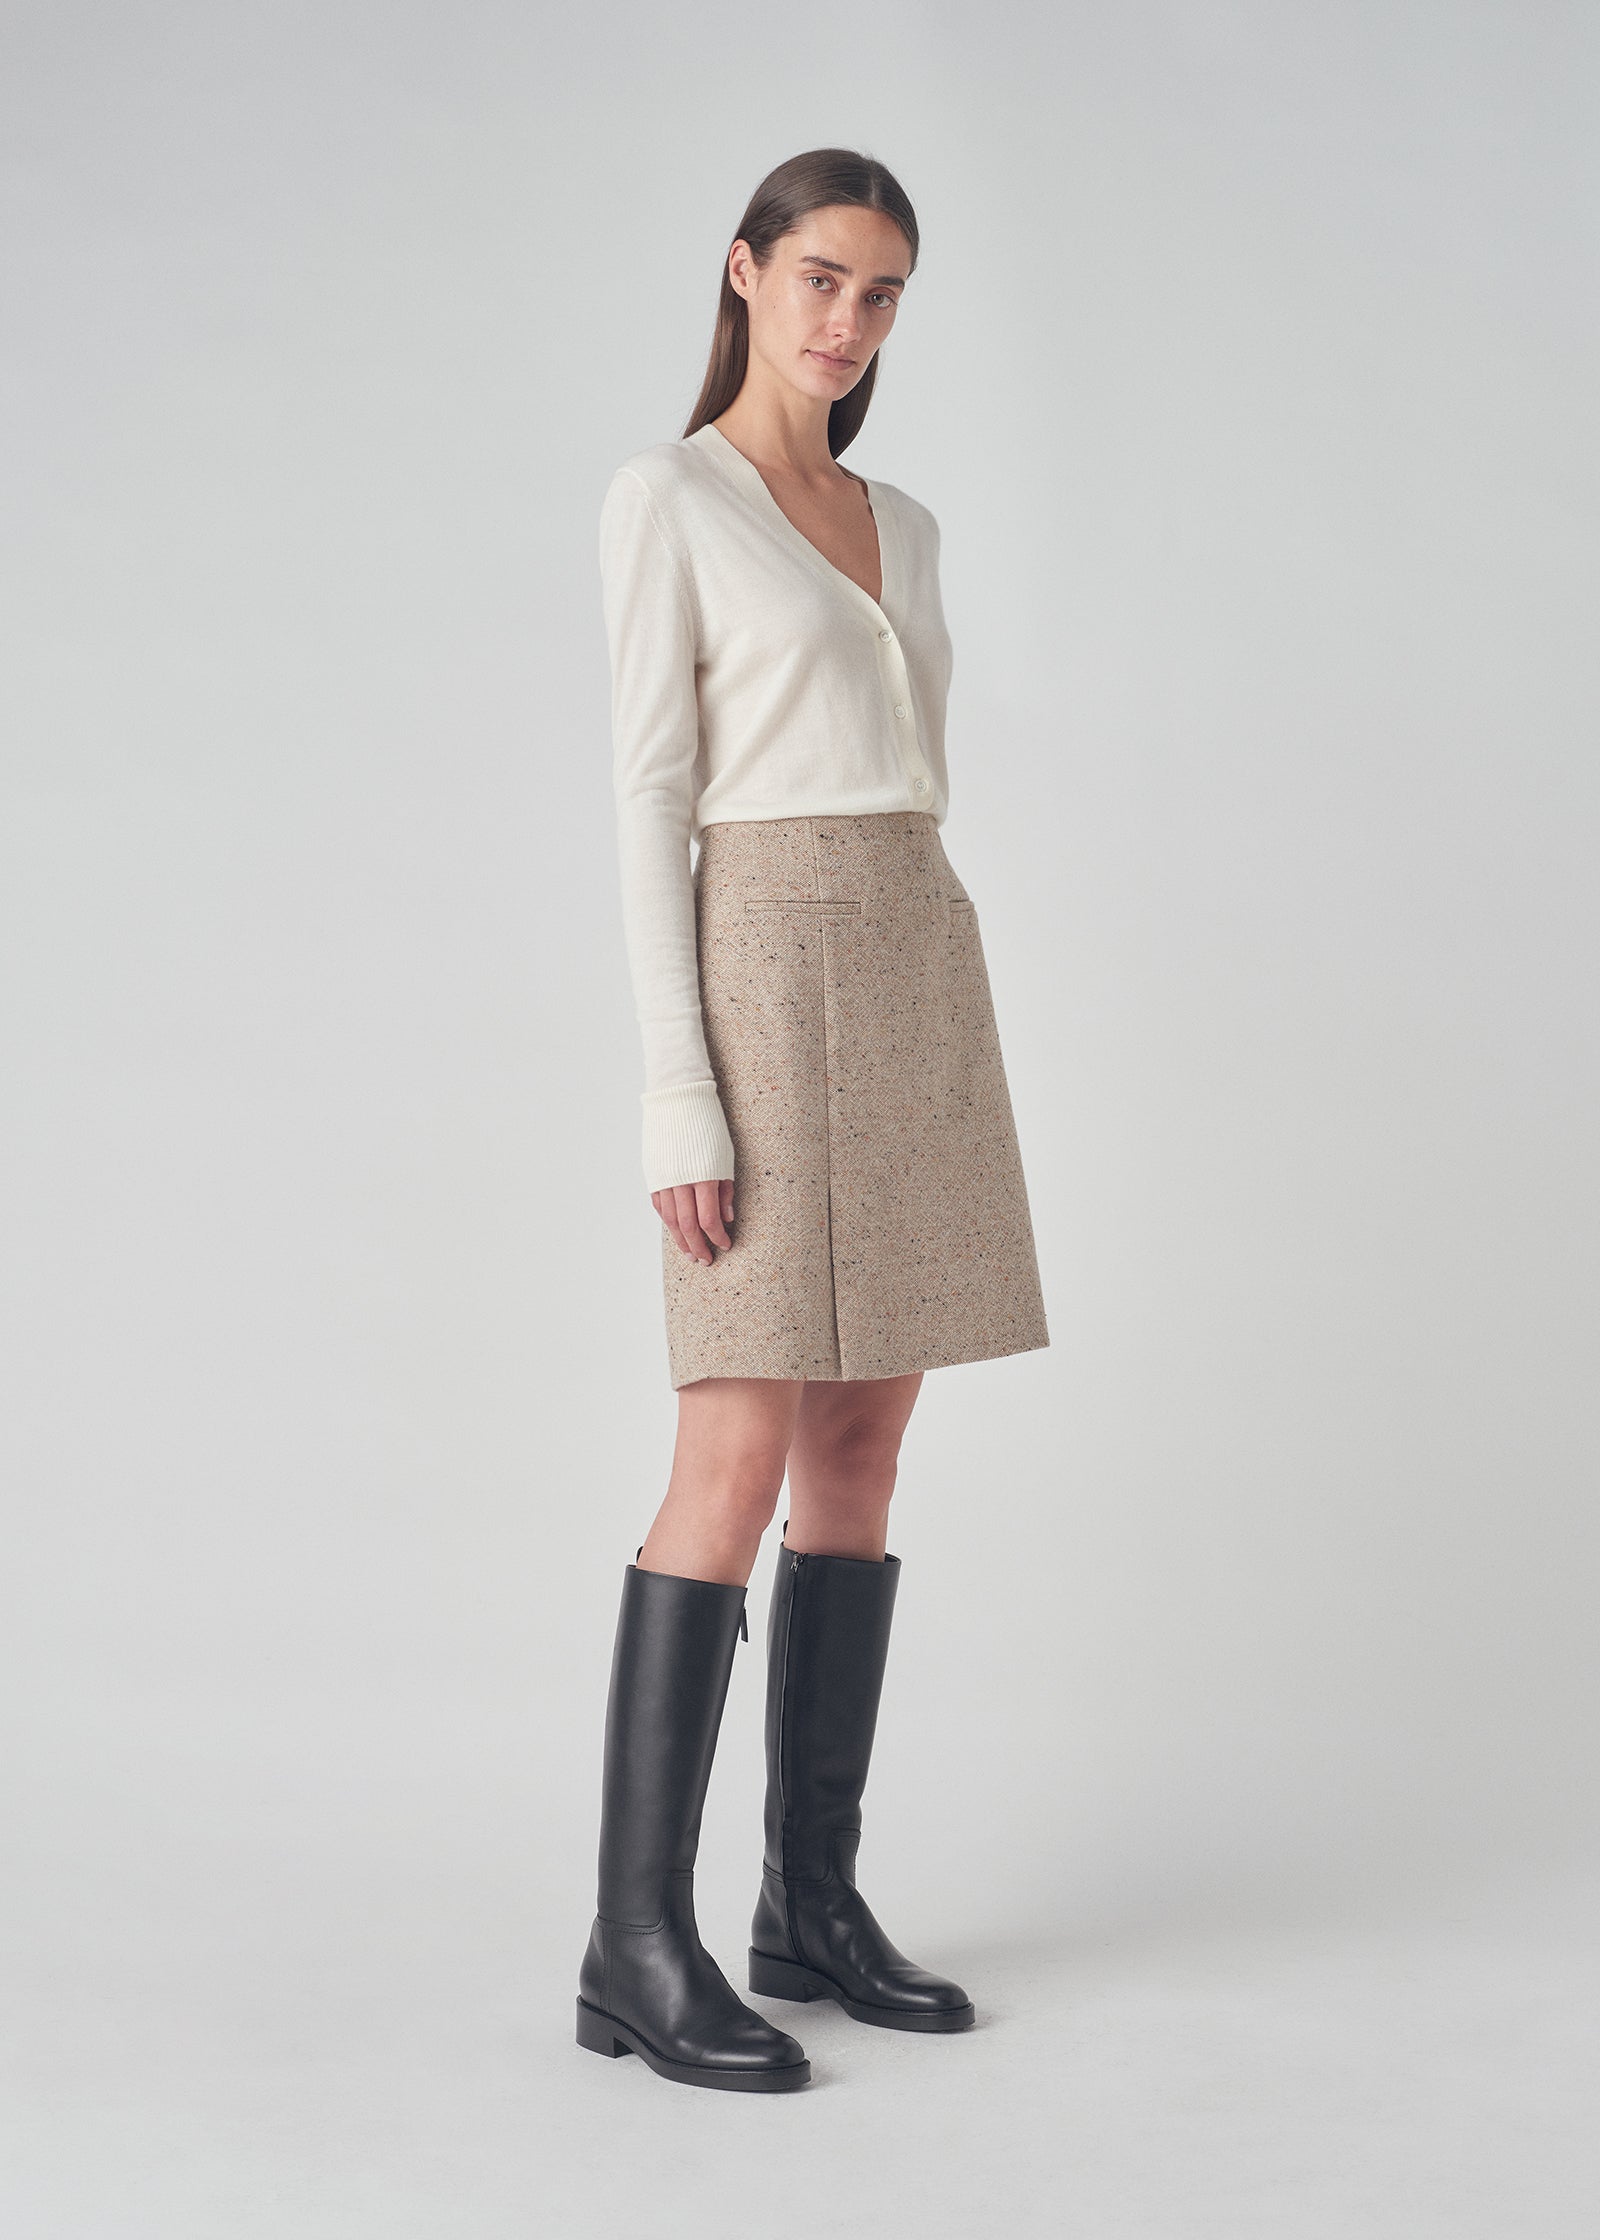 Mini Skirt in Speckled Wool Suiting - Brown Multi - CO Collections